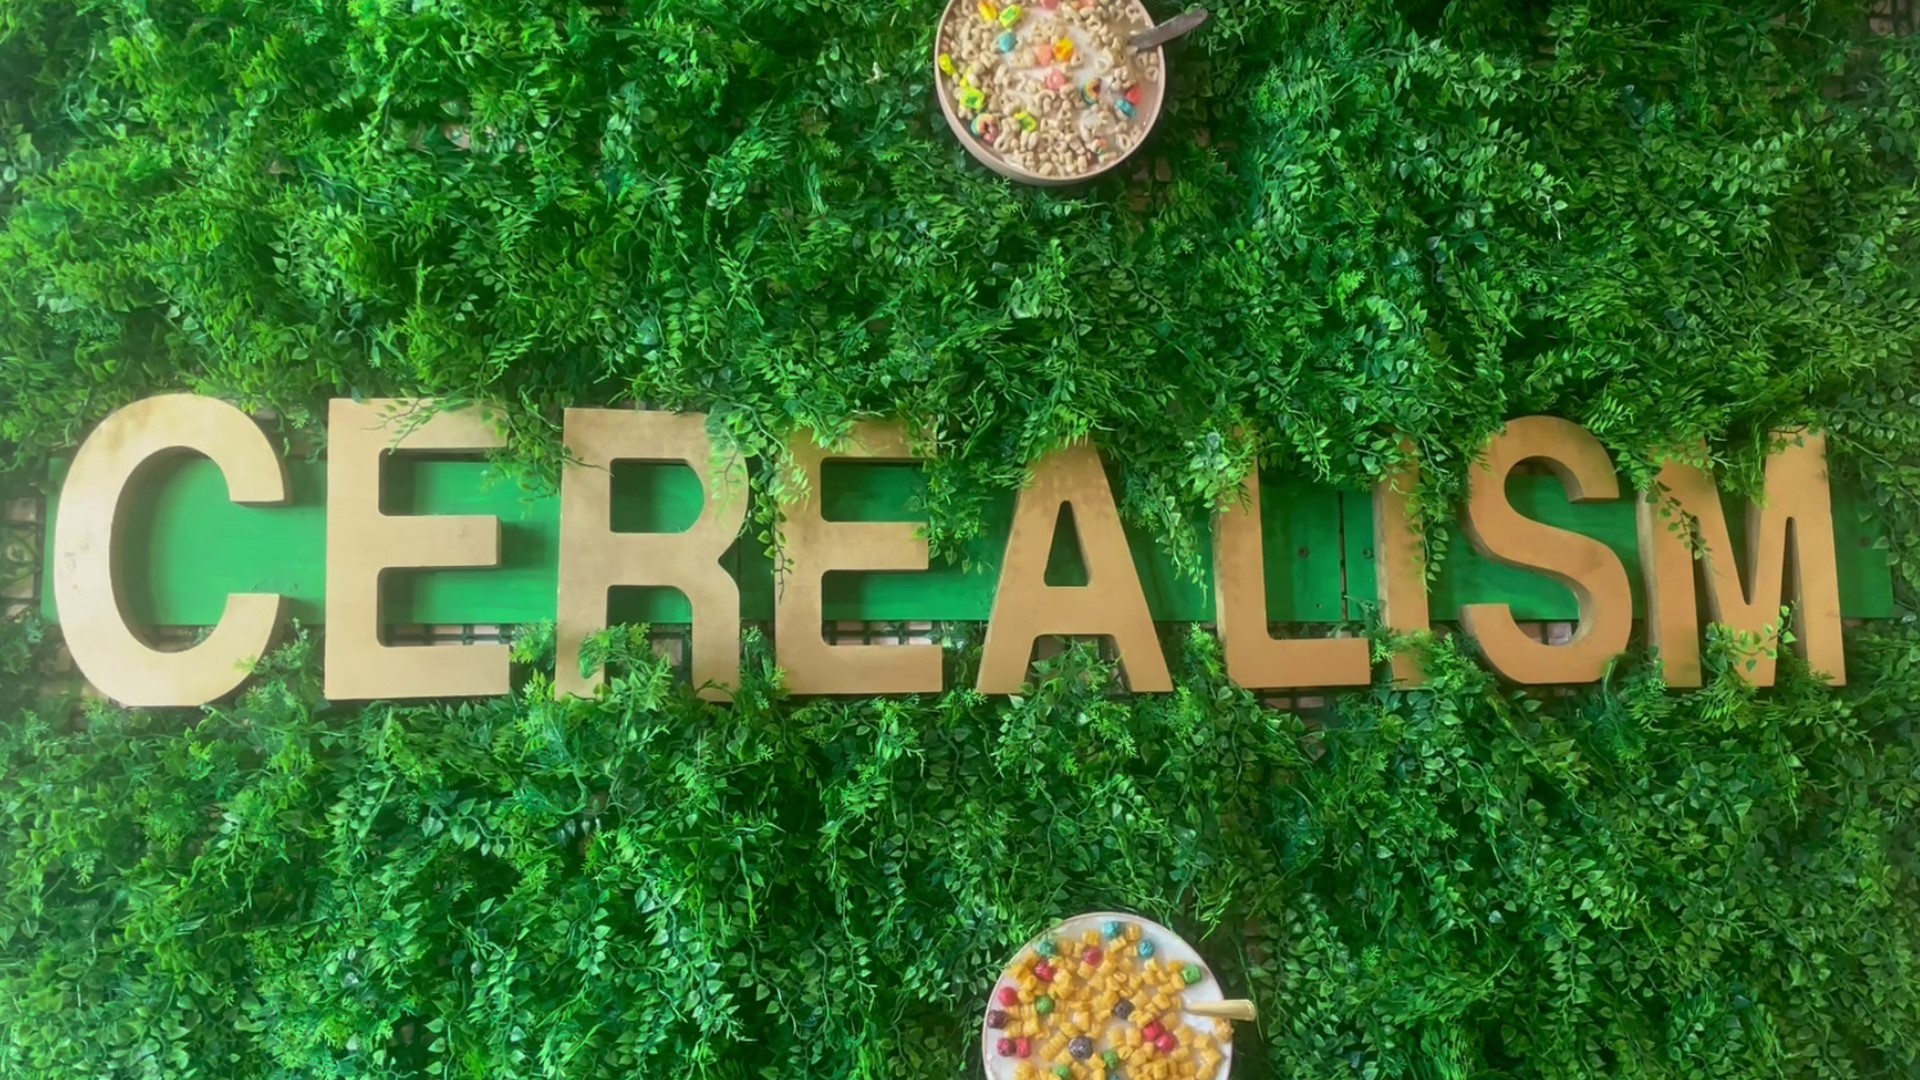 Cerealism Cafe plans to "bring morning vibes to your everyday lives" by taking your favorite cereals and turning them into different foods.